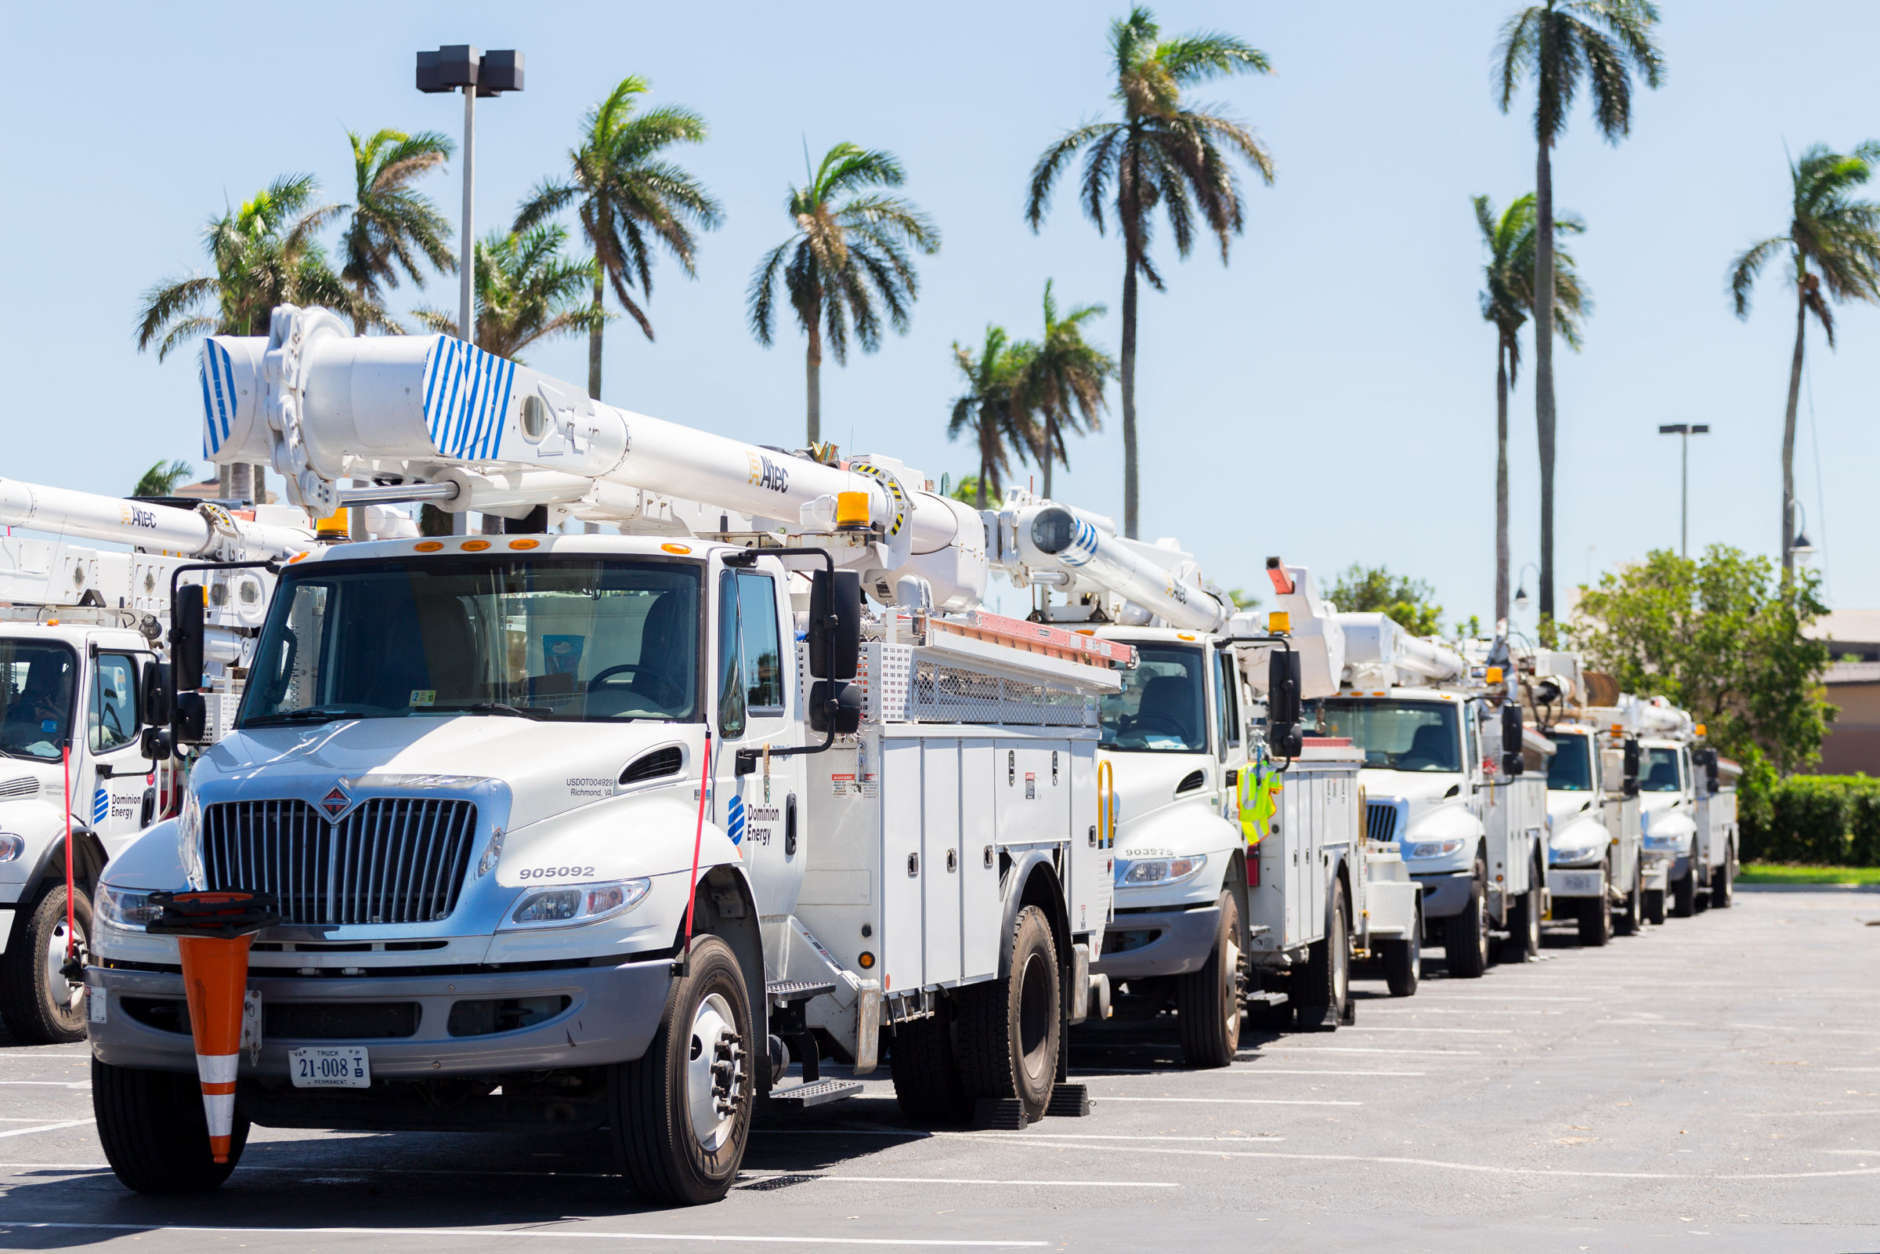 One week after Hurricane Irma blasted through Florida, Virginia-based utility crews are helping return power to the Sunshine State. (Courtesy Dominion Energy) 